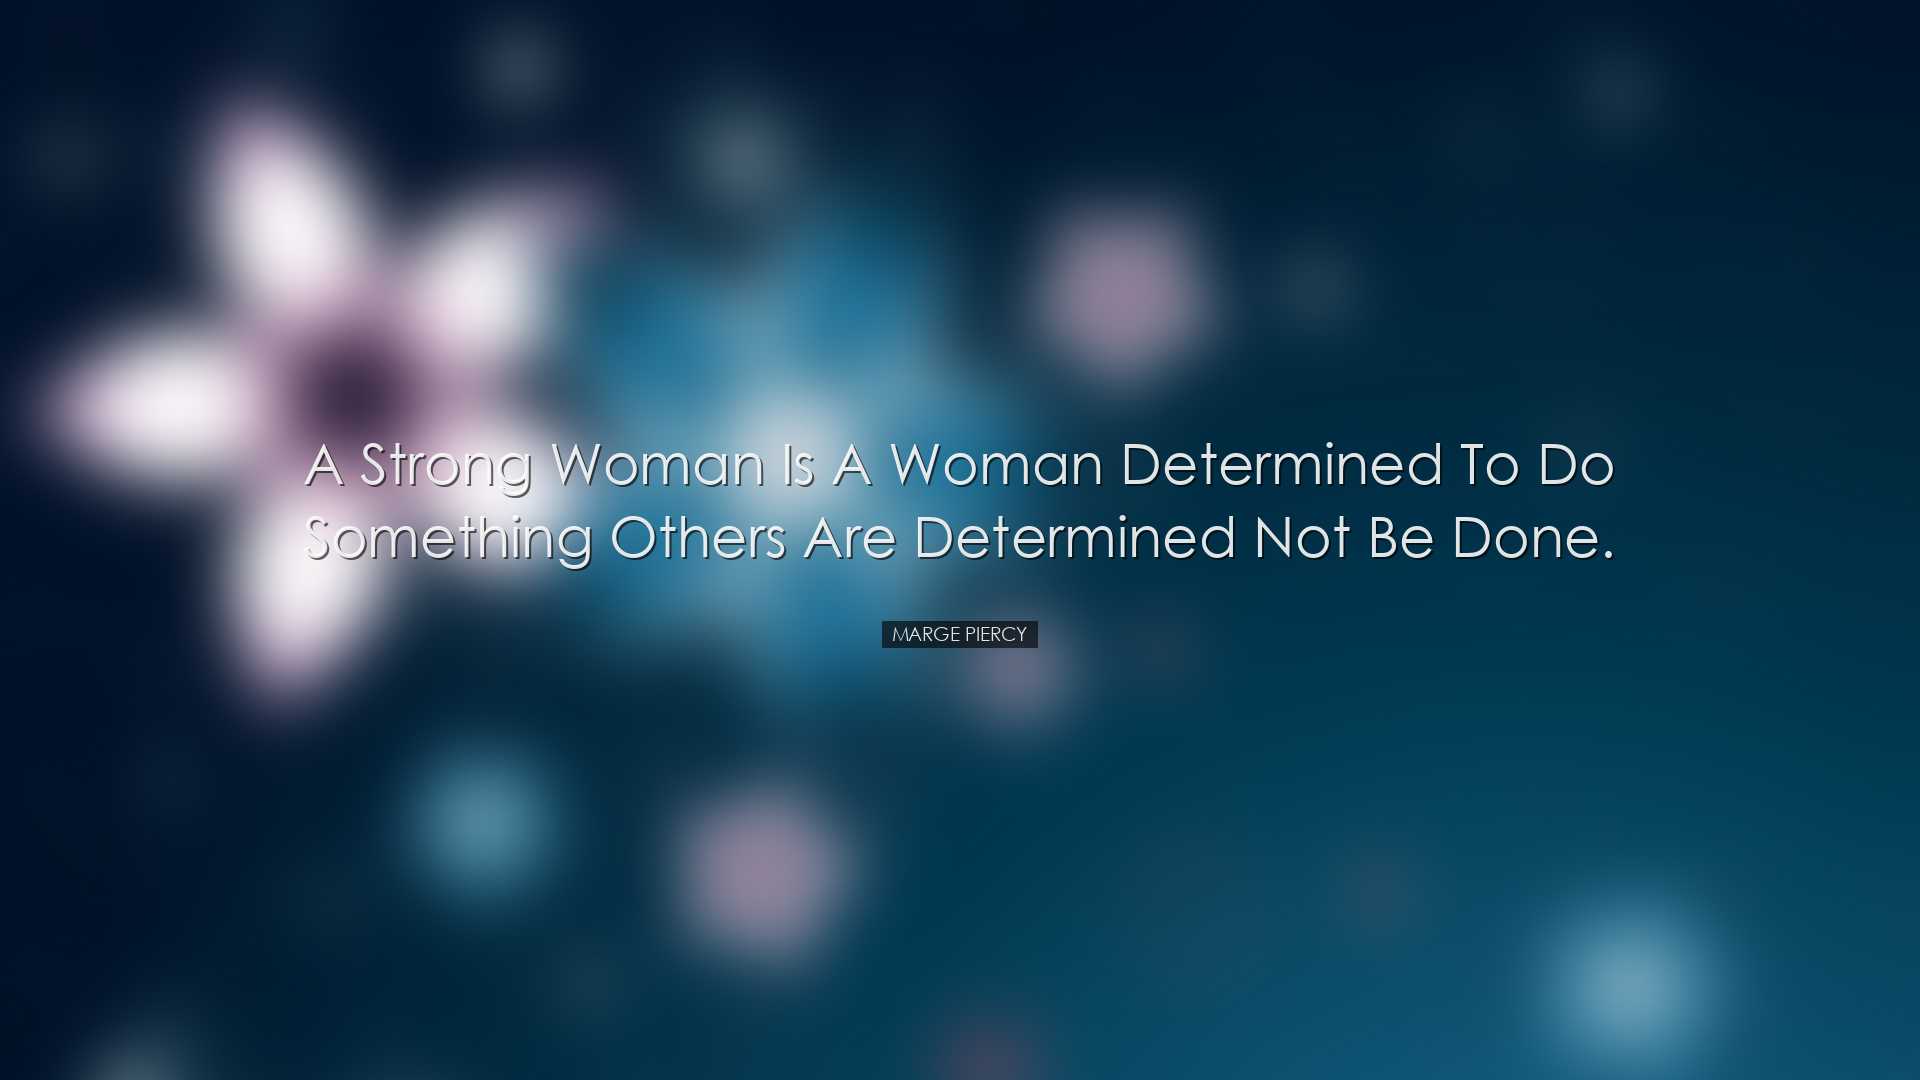 A strong woman is a woman determined to do something others are de